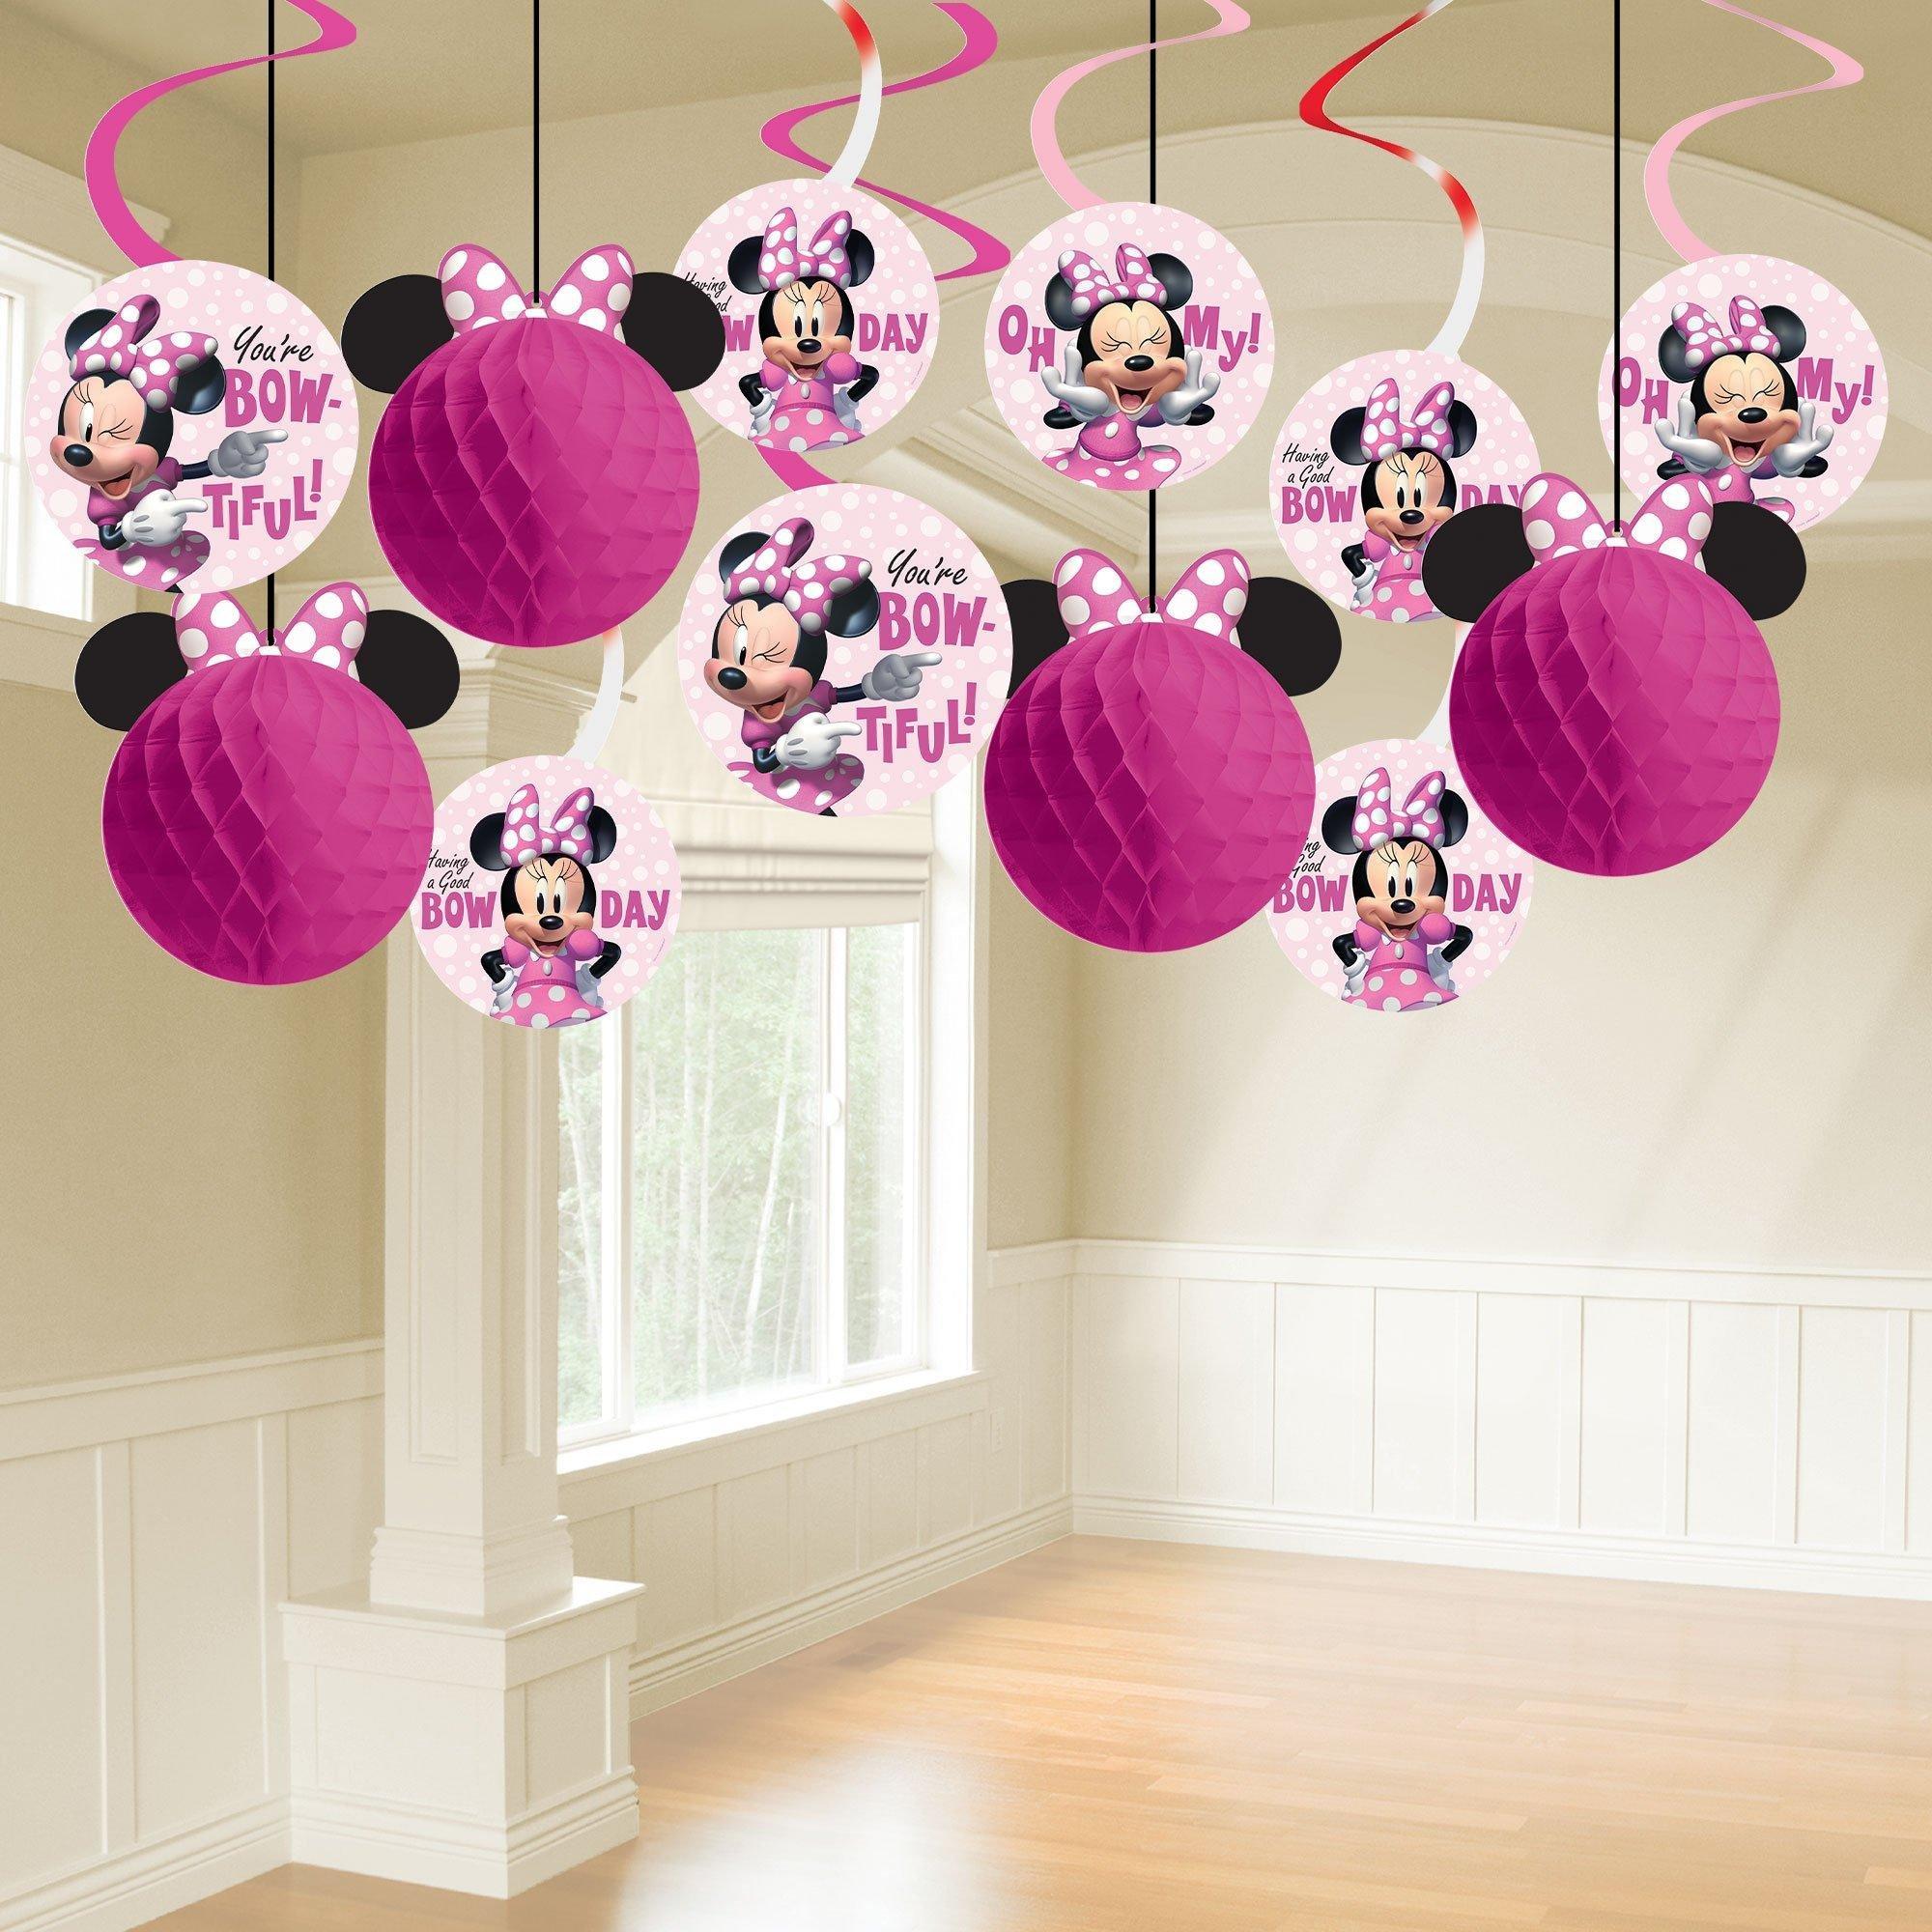 Minnie Mouse Forever Party Decorating Supplies Pack - Kit Includes Banners, Lantern Decorations & Centerpiece